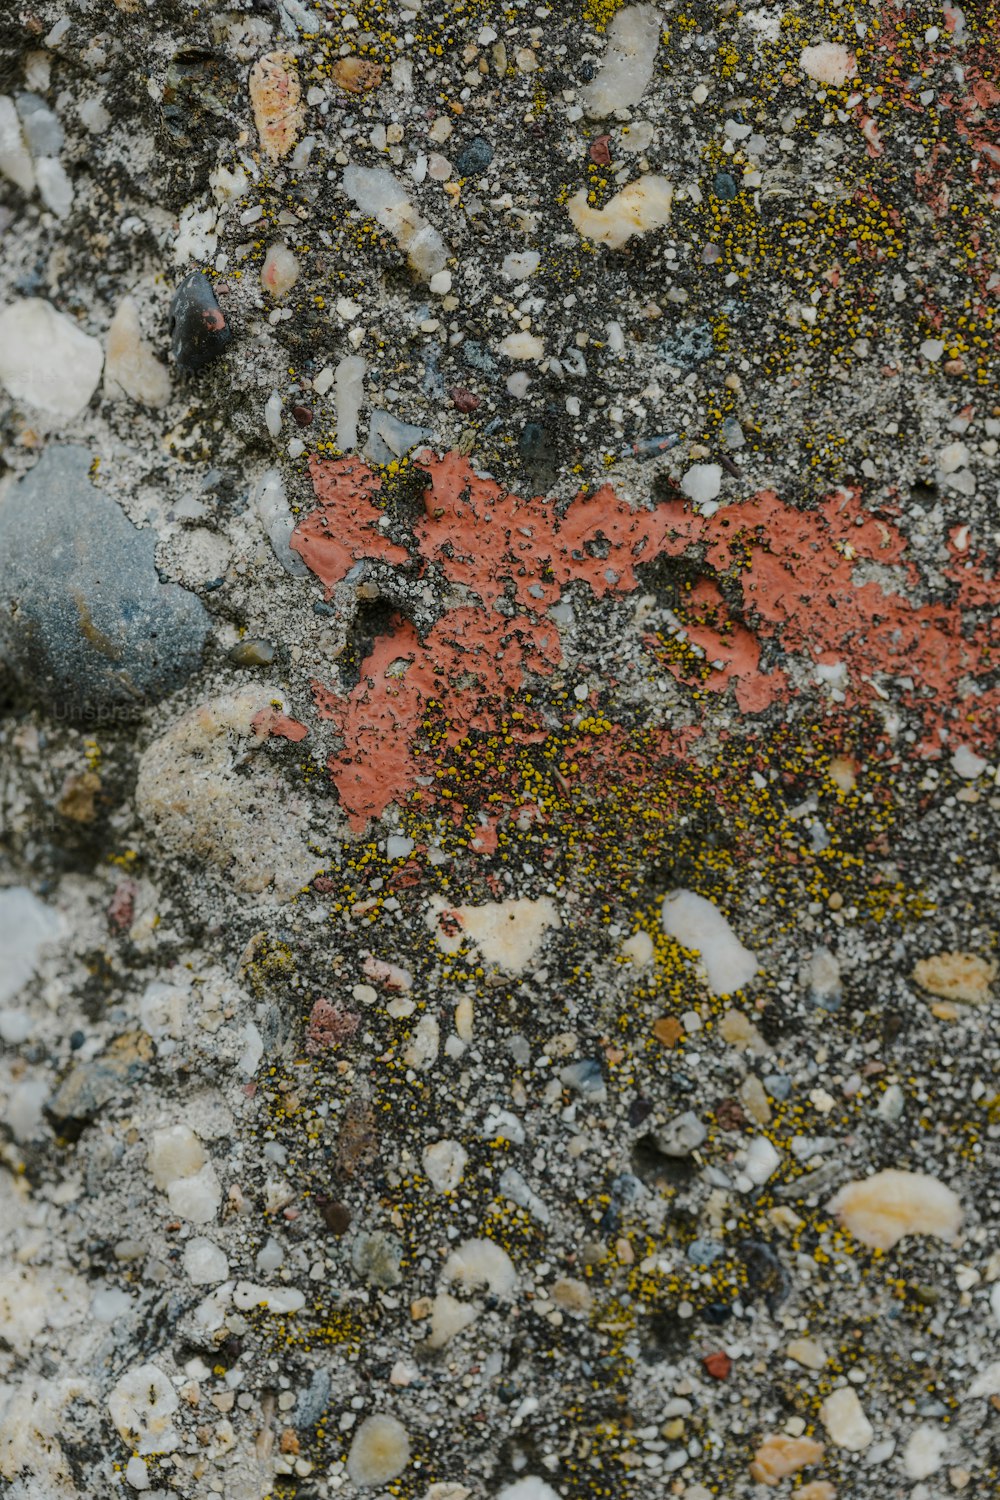 a close up of rocks and gravel with a red star